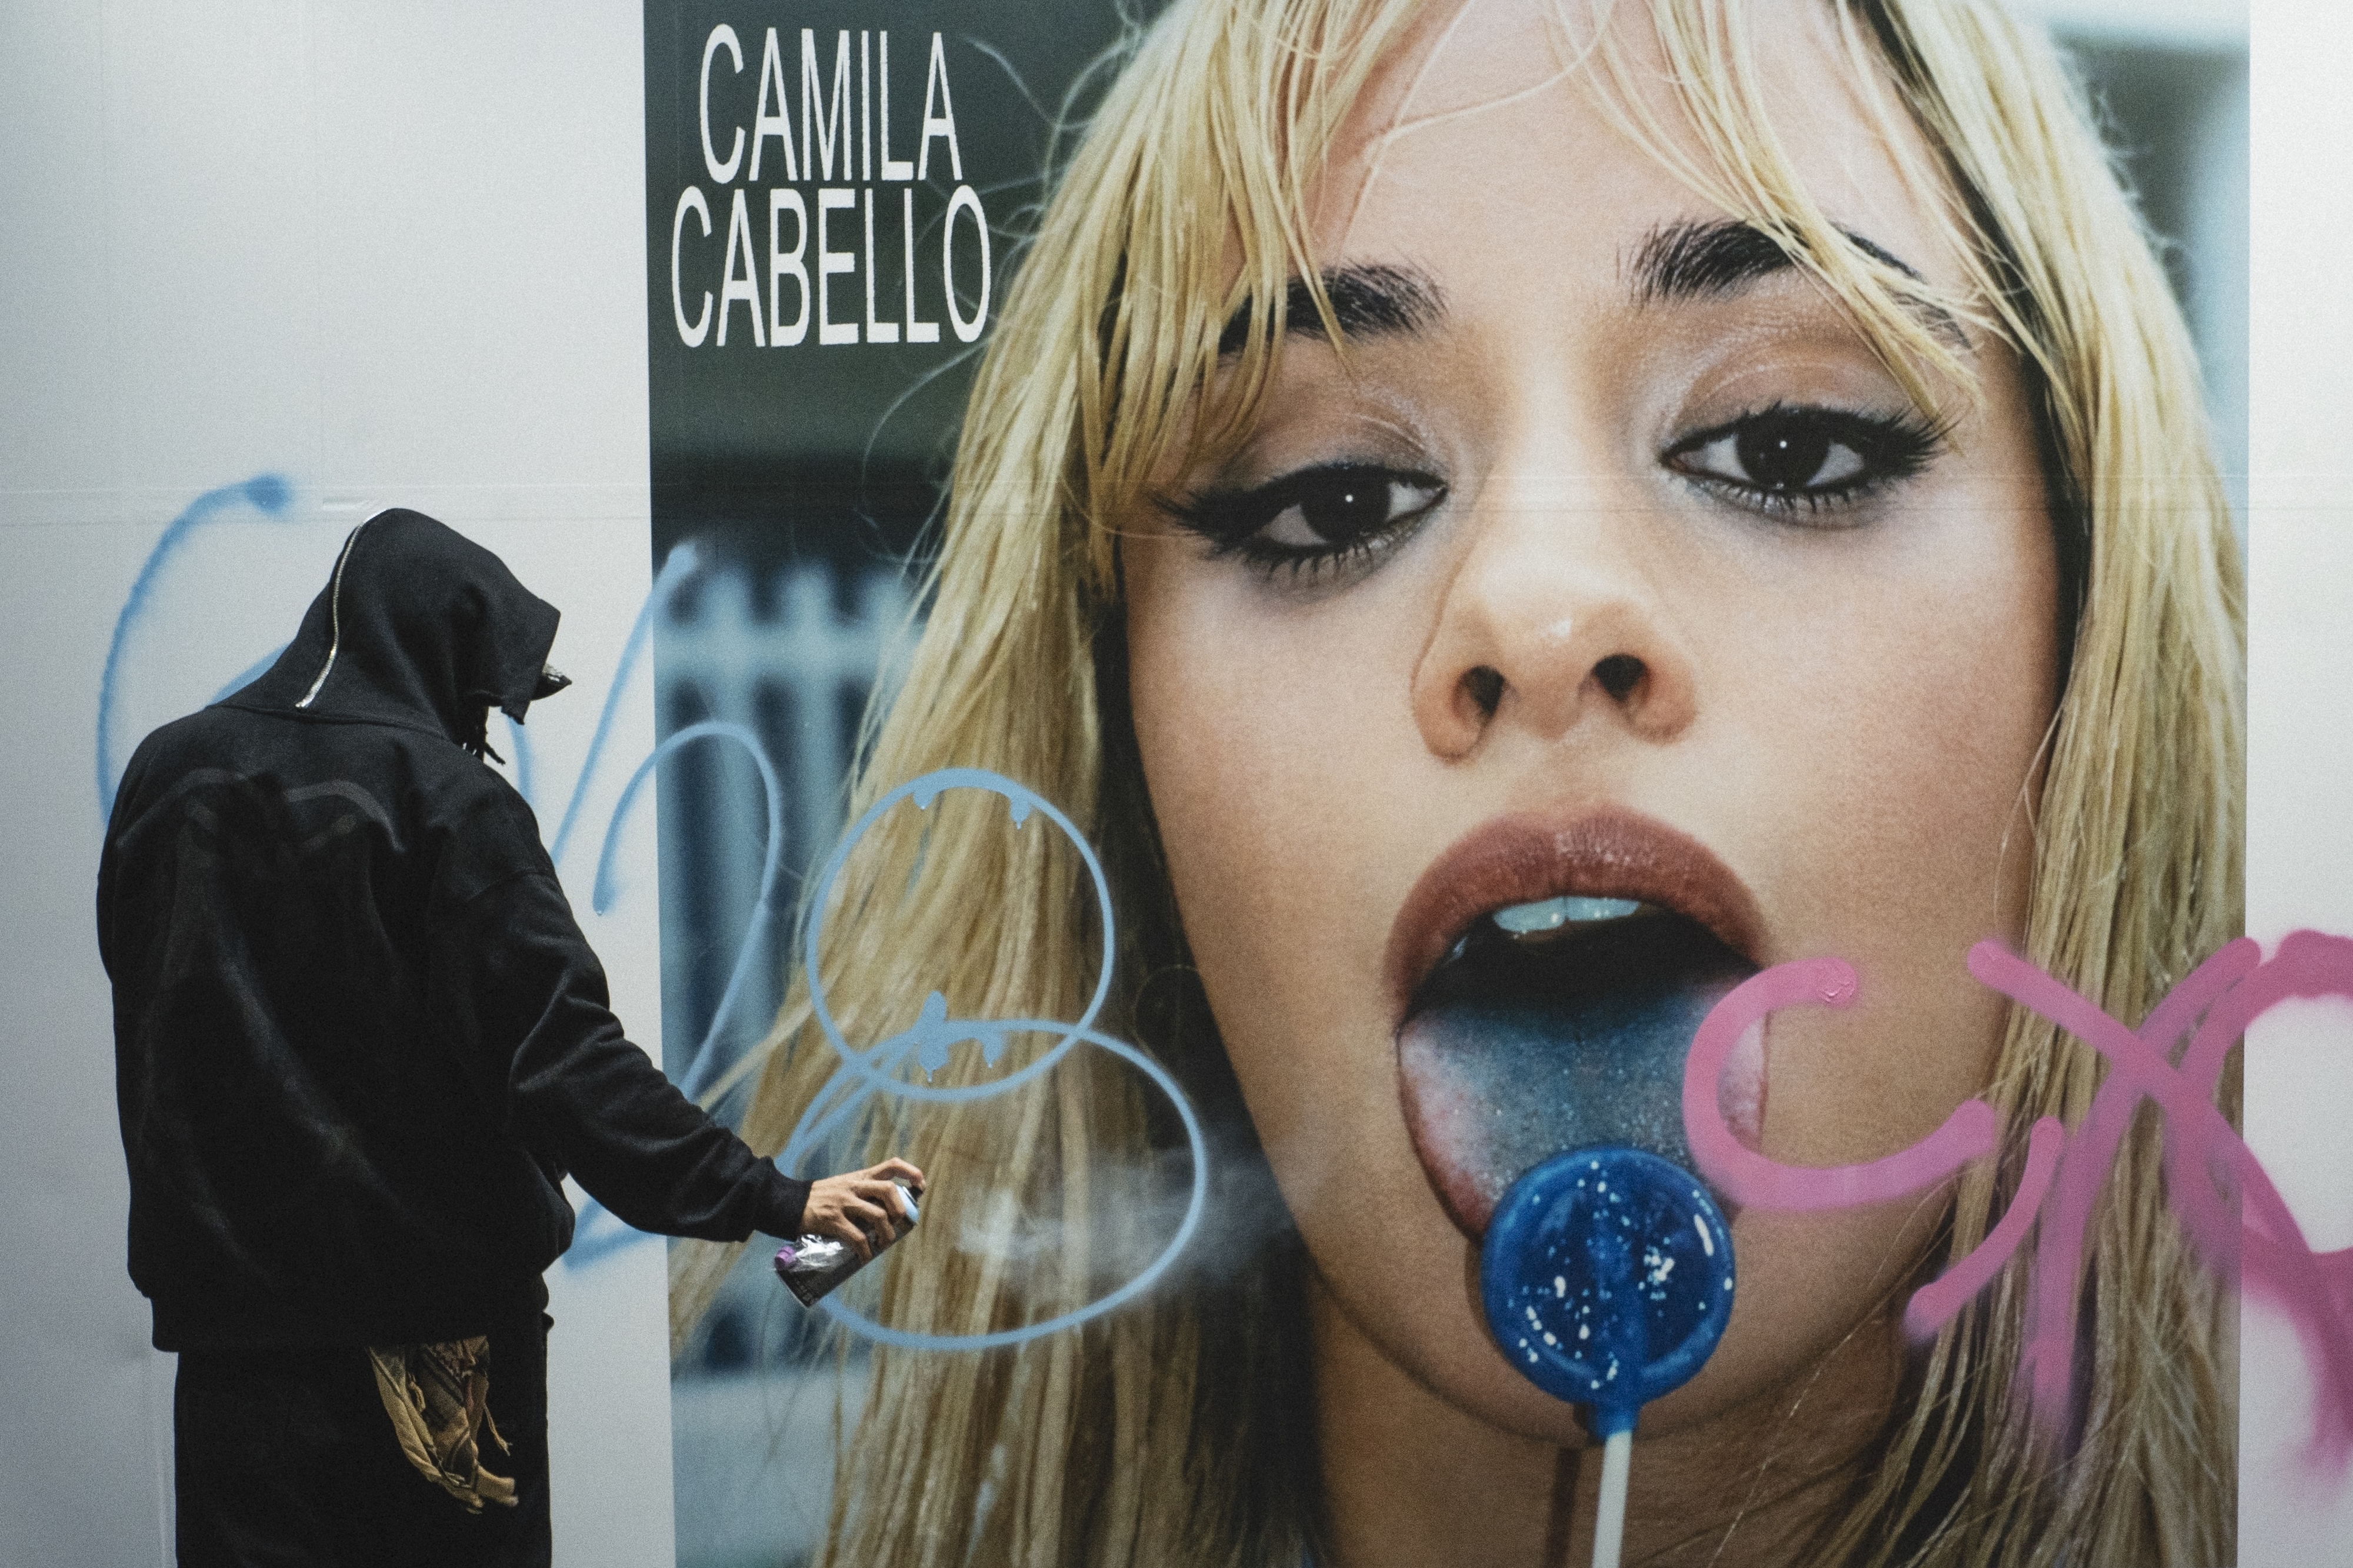 A hooded person spray-paints graffiti on a large poster of Camila Cabello licking a blue lollipop